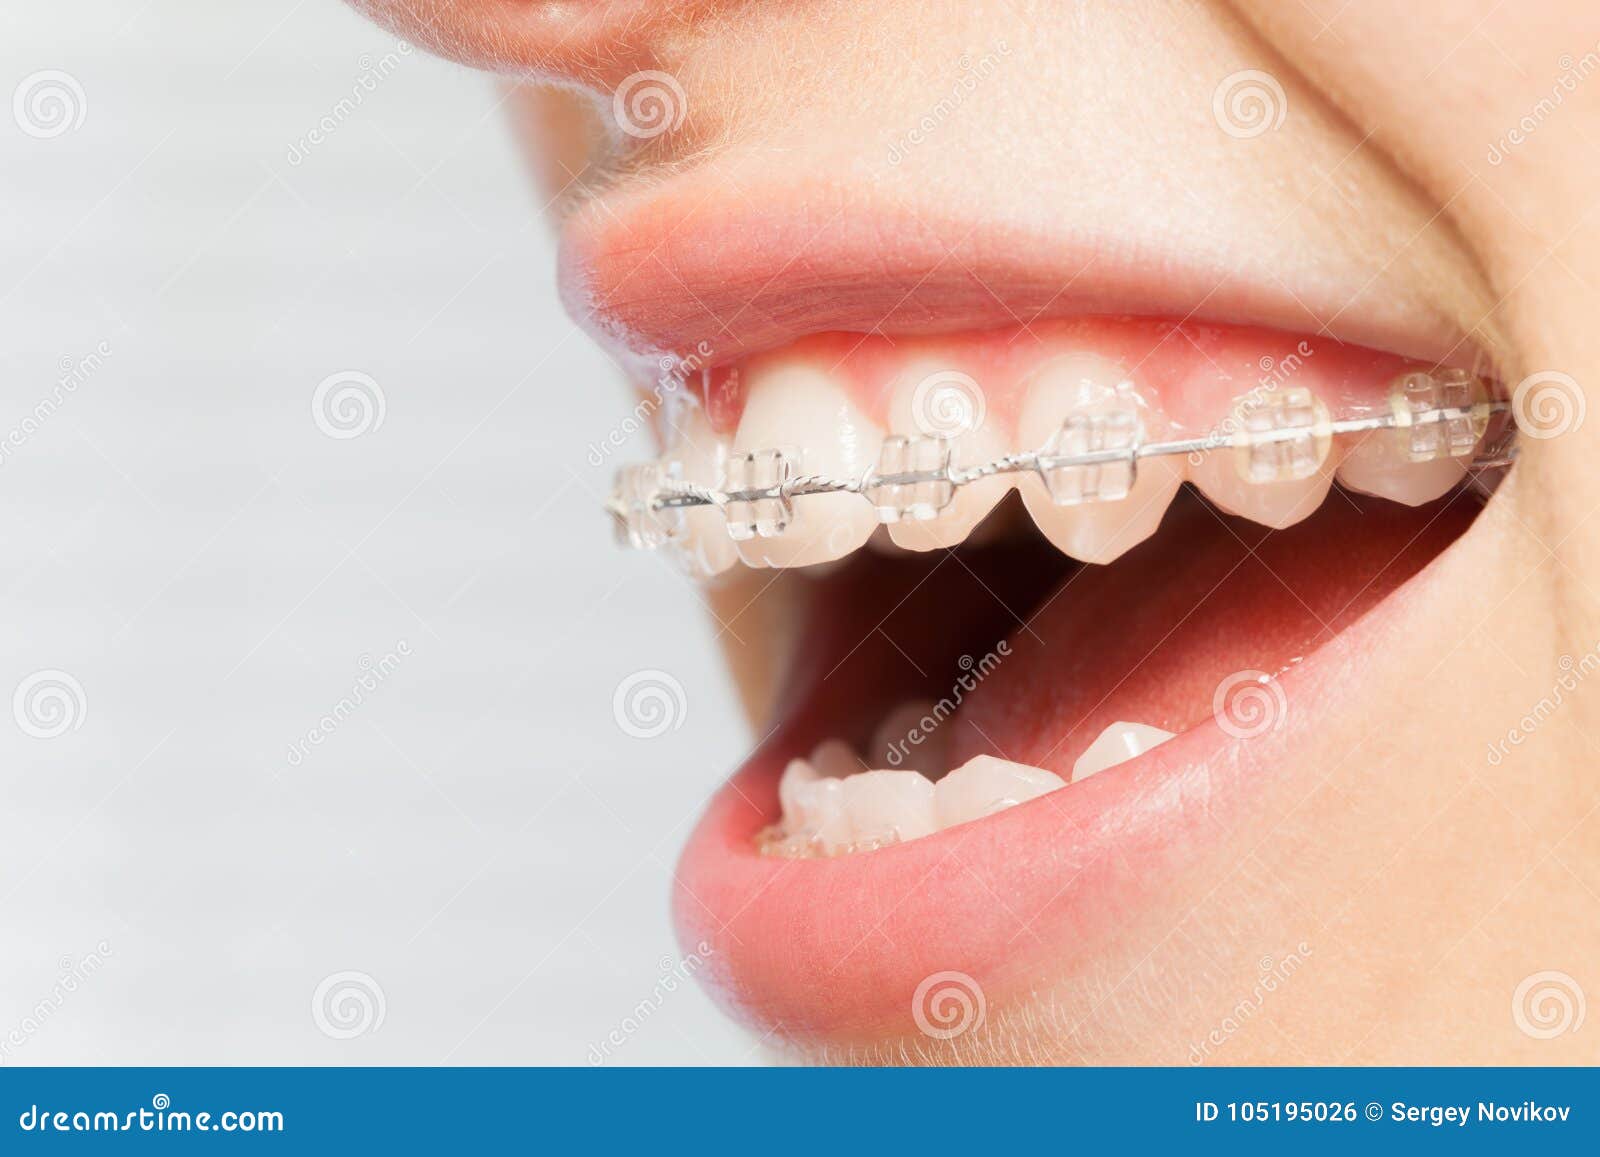 orthodontics correction of jaws with clear bracket